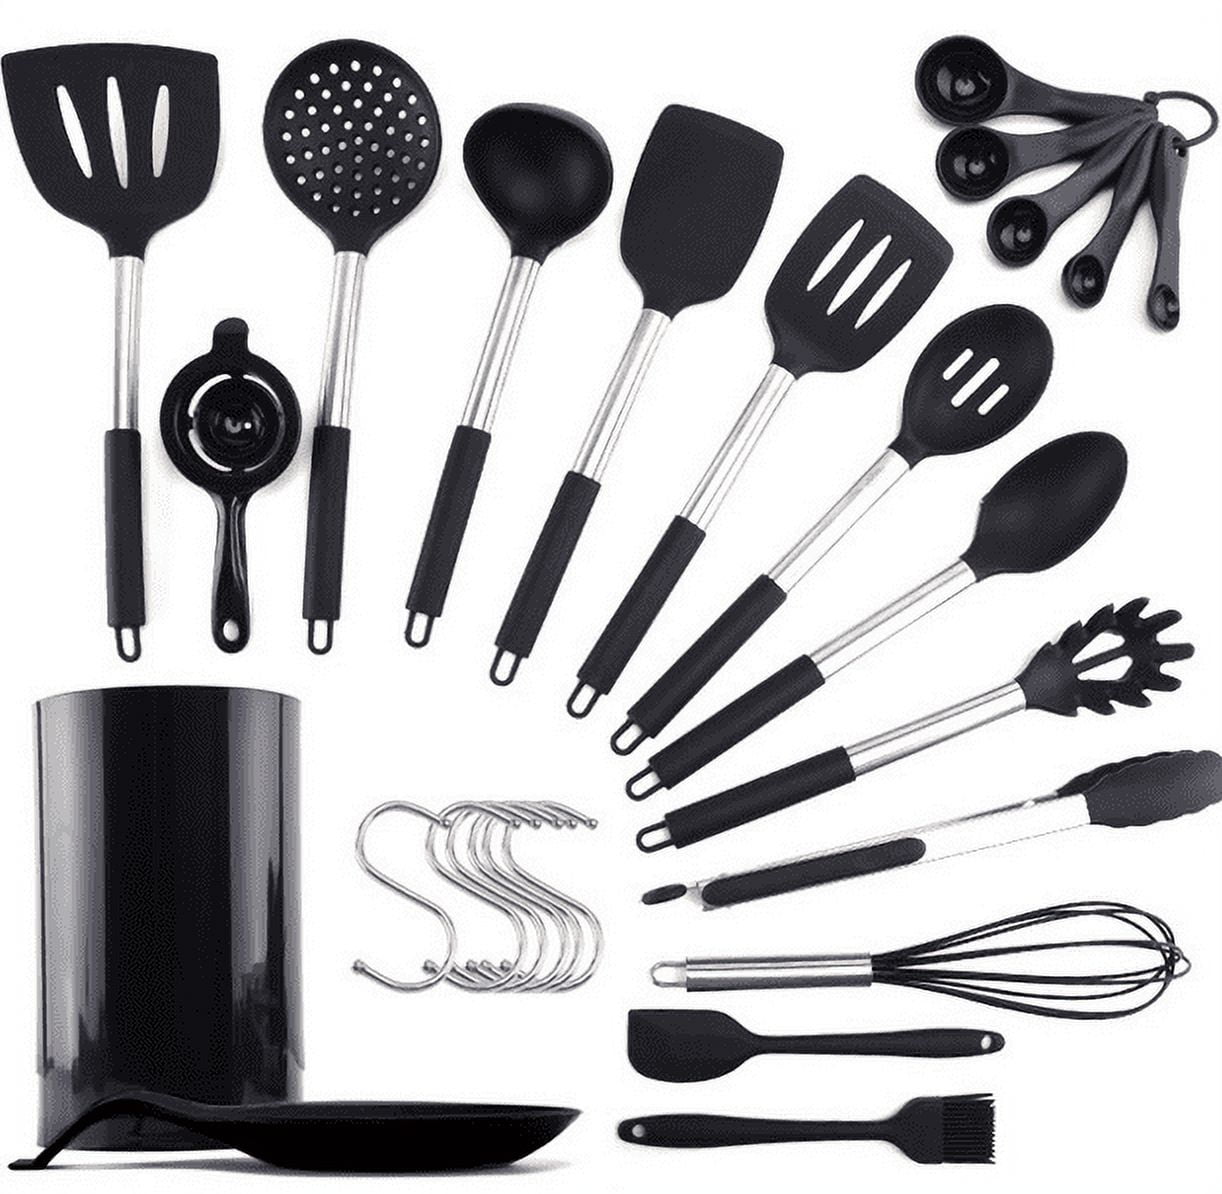 Cleaning Silicone Cooking Utensils